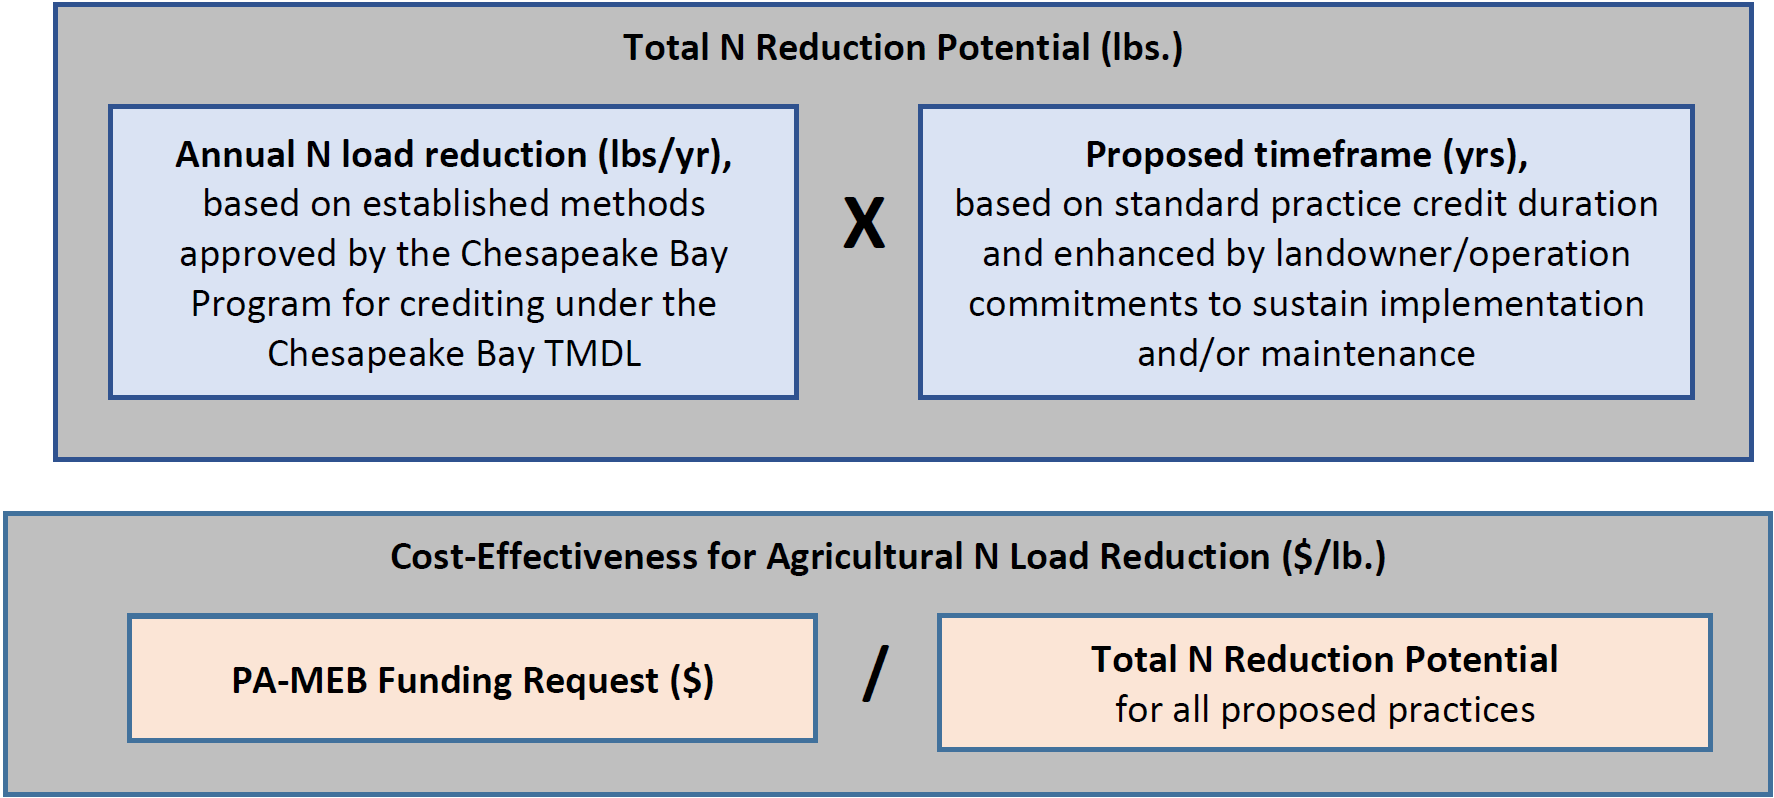 One table displaying Total N Reduction Potential (lbs.) as a function of Annual N Load Reduction (lbs. per year) by Proposed timeframe (years). The second table shows Cost-Effectiveness for Agricultural N Load Reduction (dollar per Lb.) as PA-MEB Funding Request (dollars) divided by Total N Reduction Potential for all proposed practices